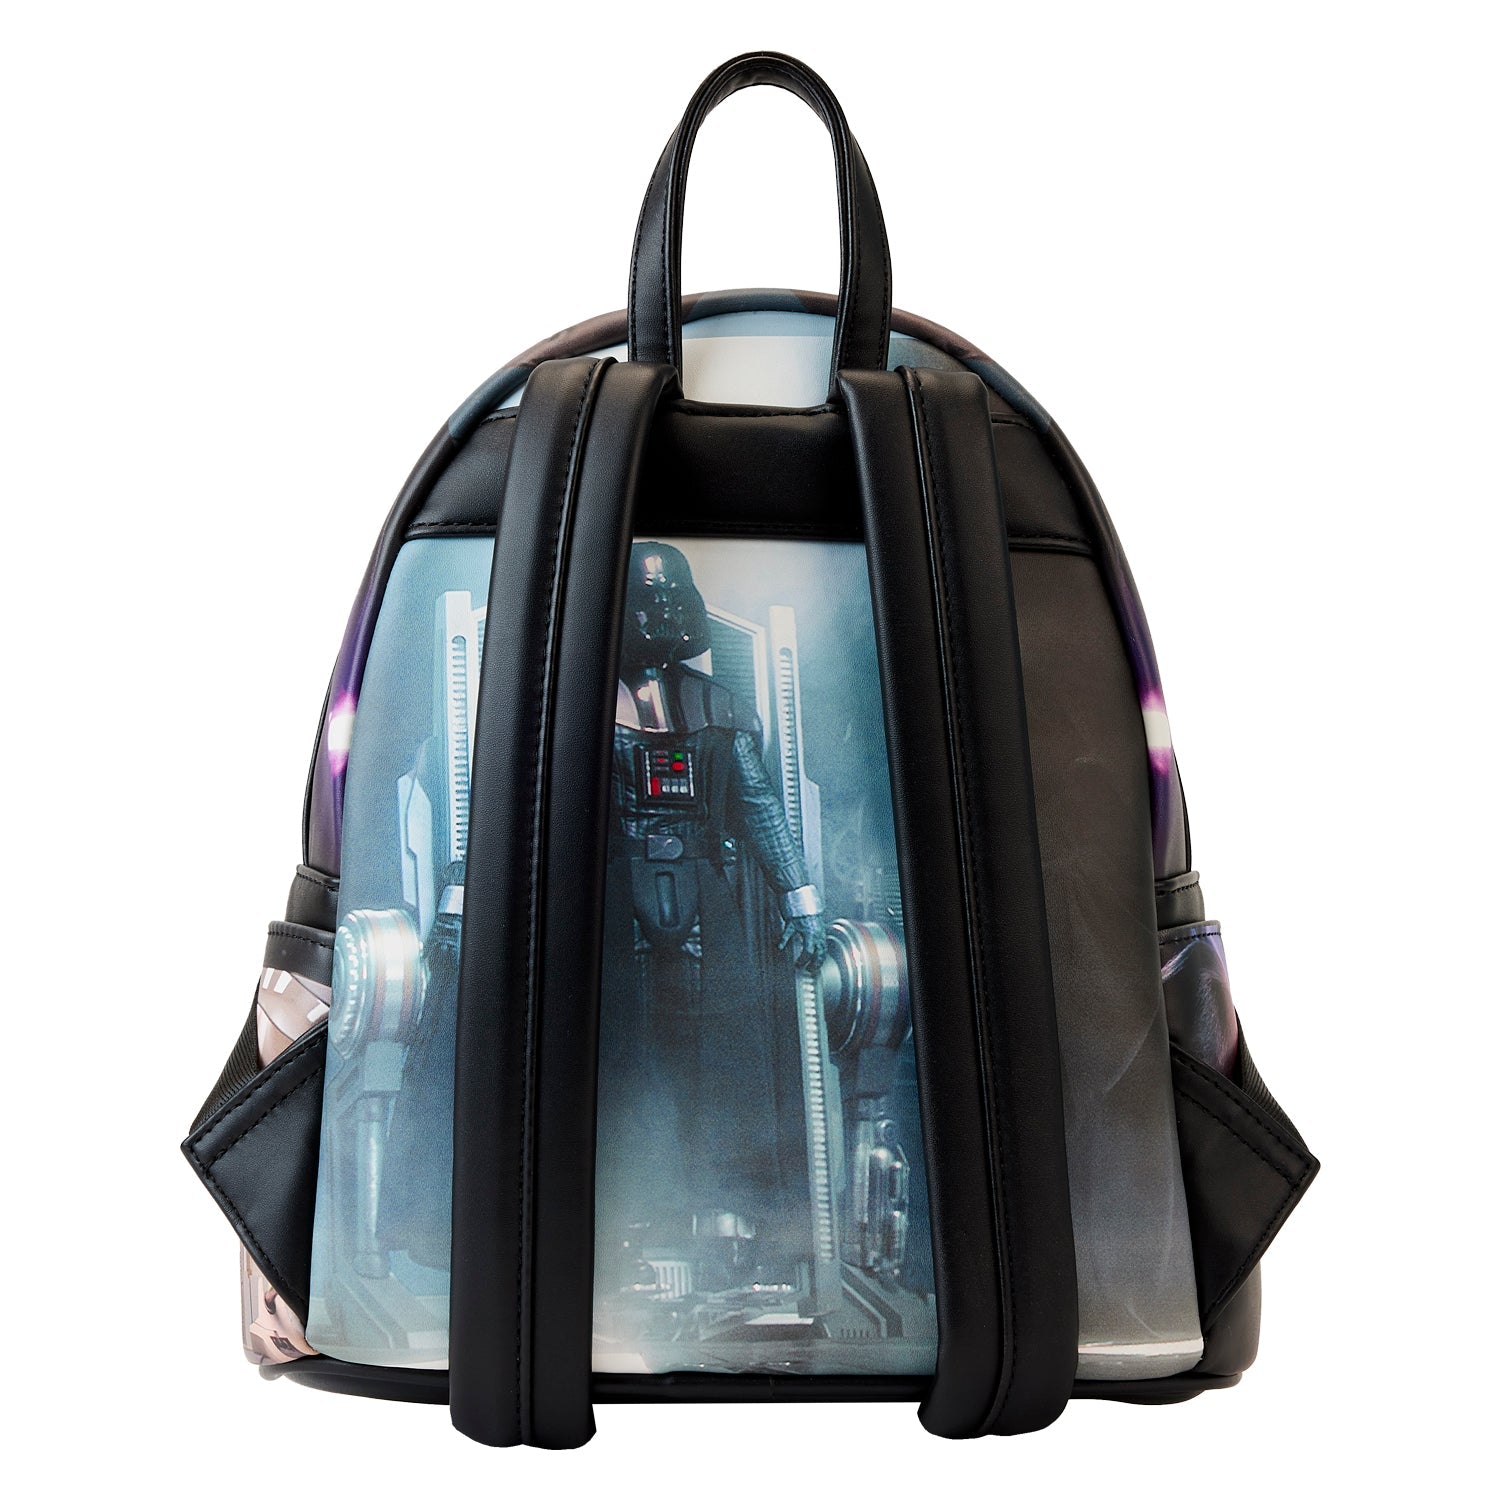 Loungefly x Star Wars Scenes Revenge Of The Sith Mini Backpack - GeekCore